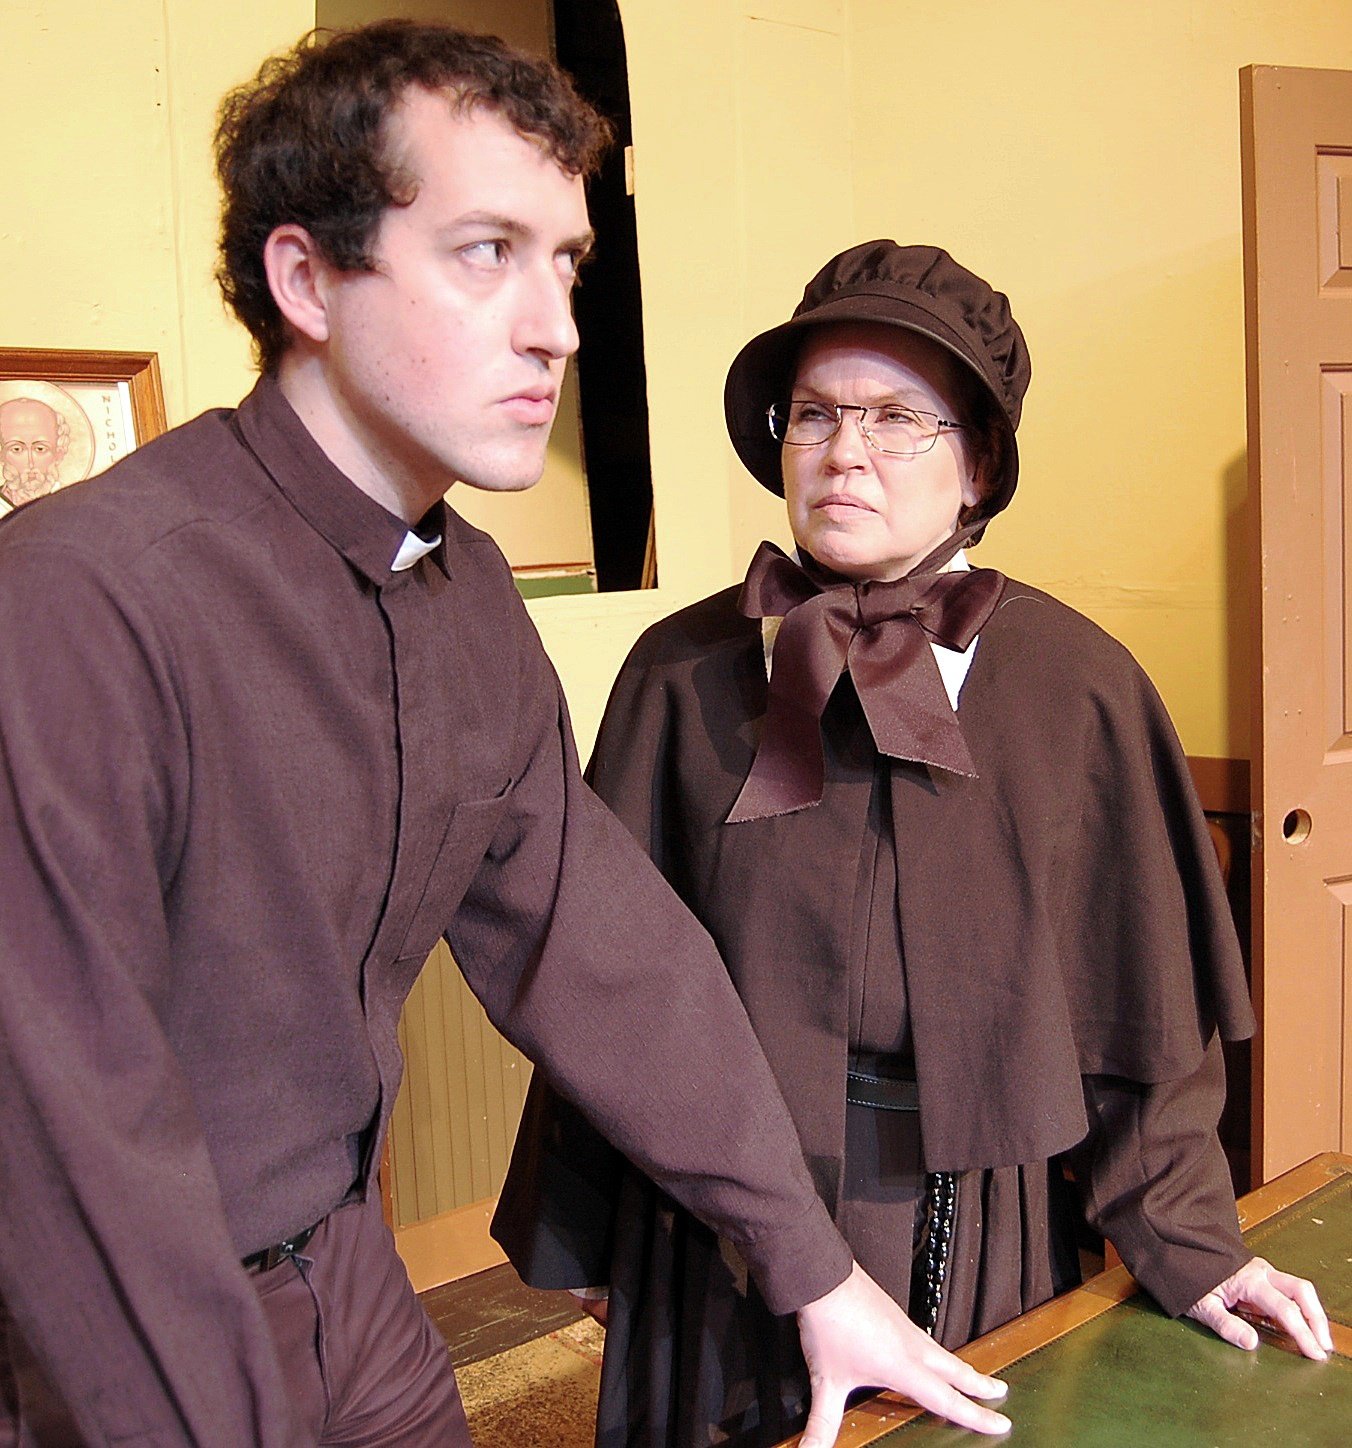 The stern Sister Aloysius (Joyce McGookey of Royal Oak pictured R) questions the young nun; Sister James (Erica Shubin of Ypsilanti) (L) in Doubt, a Parable.
3